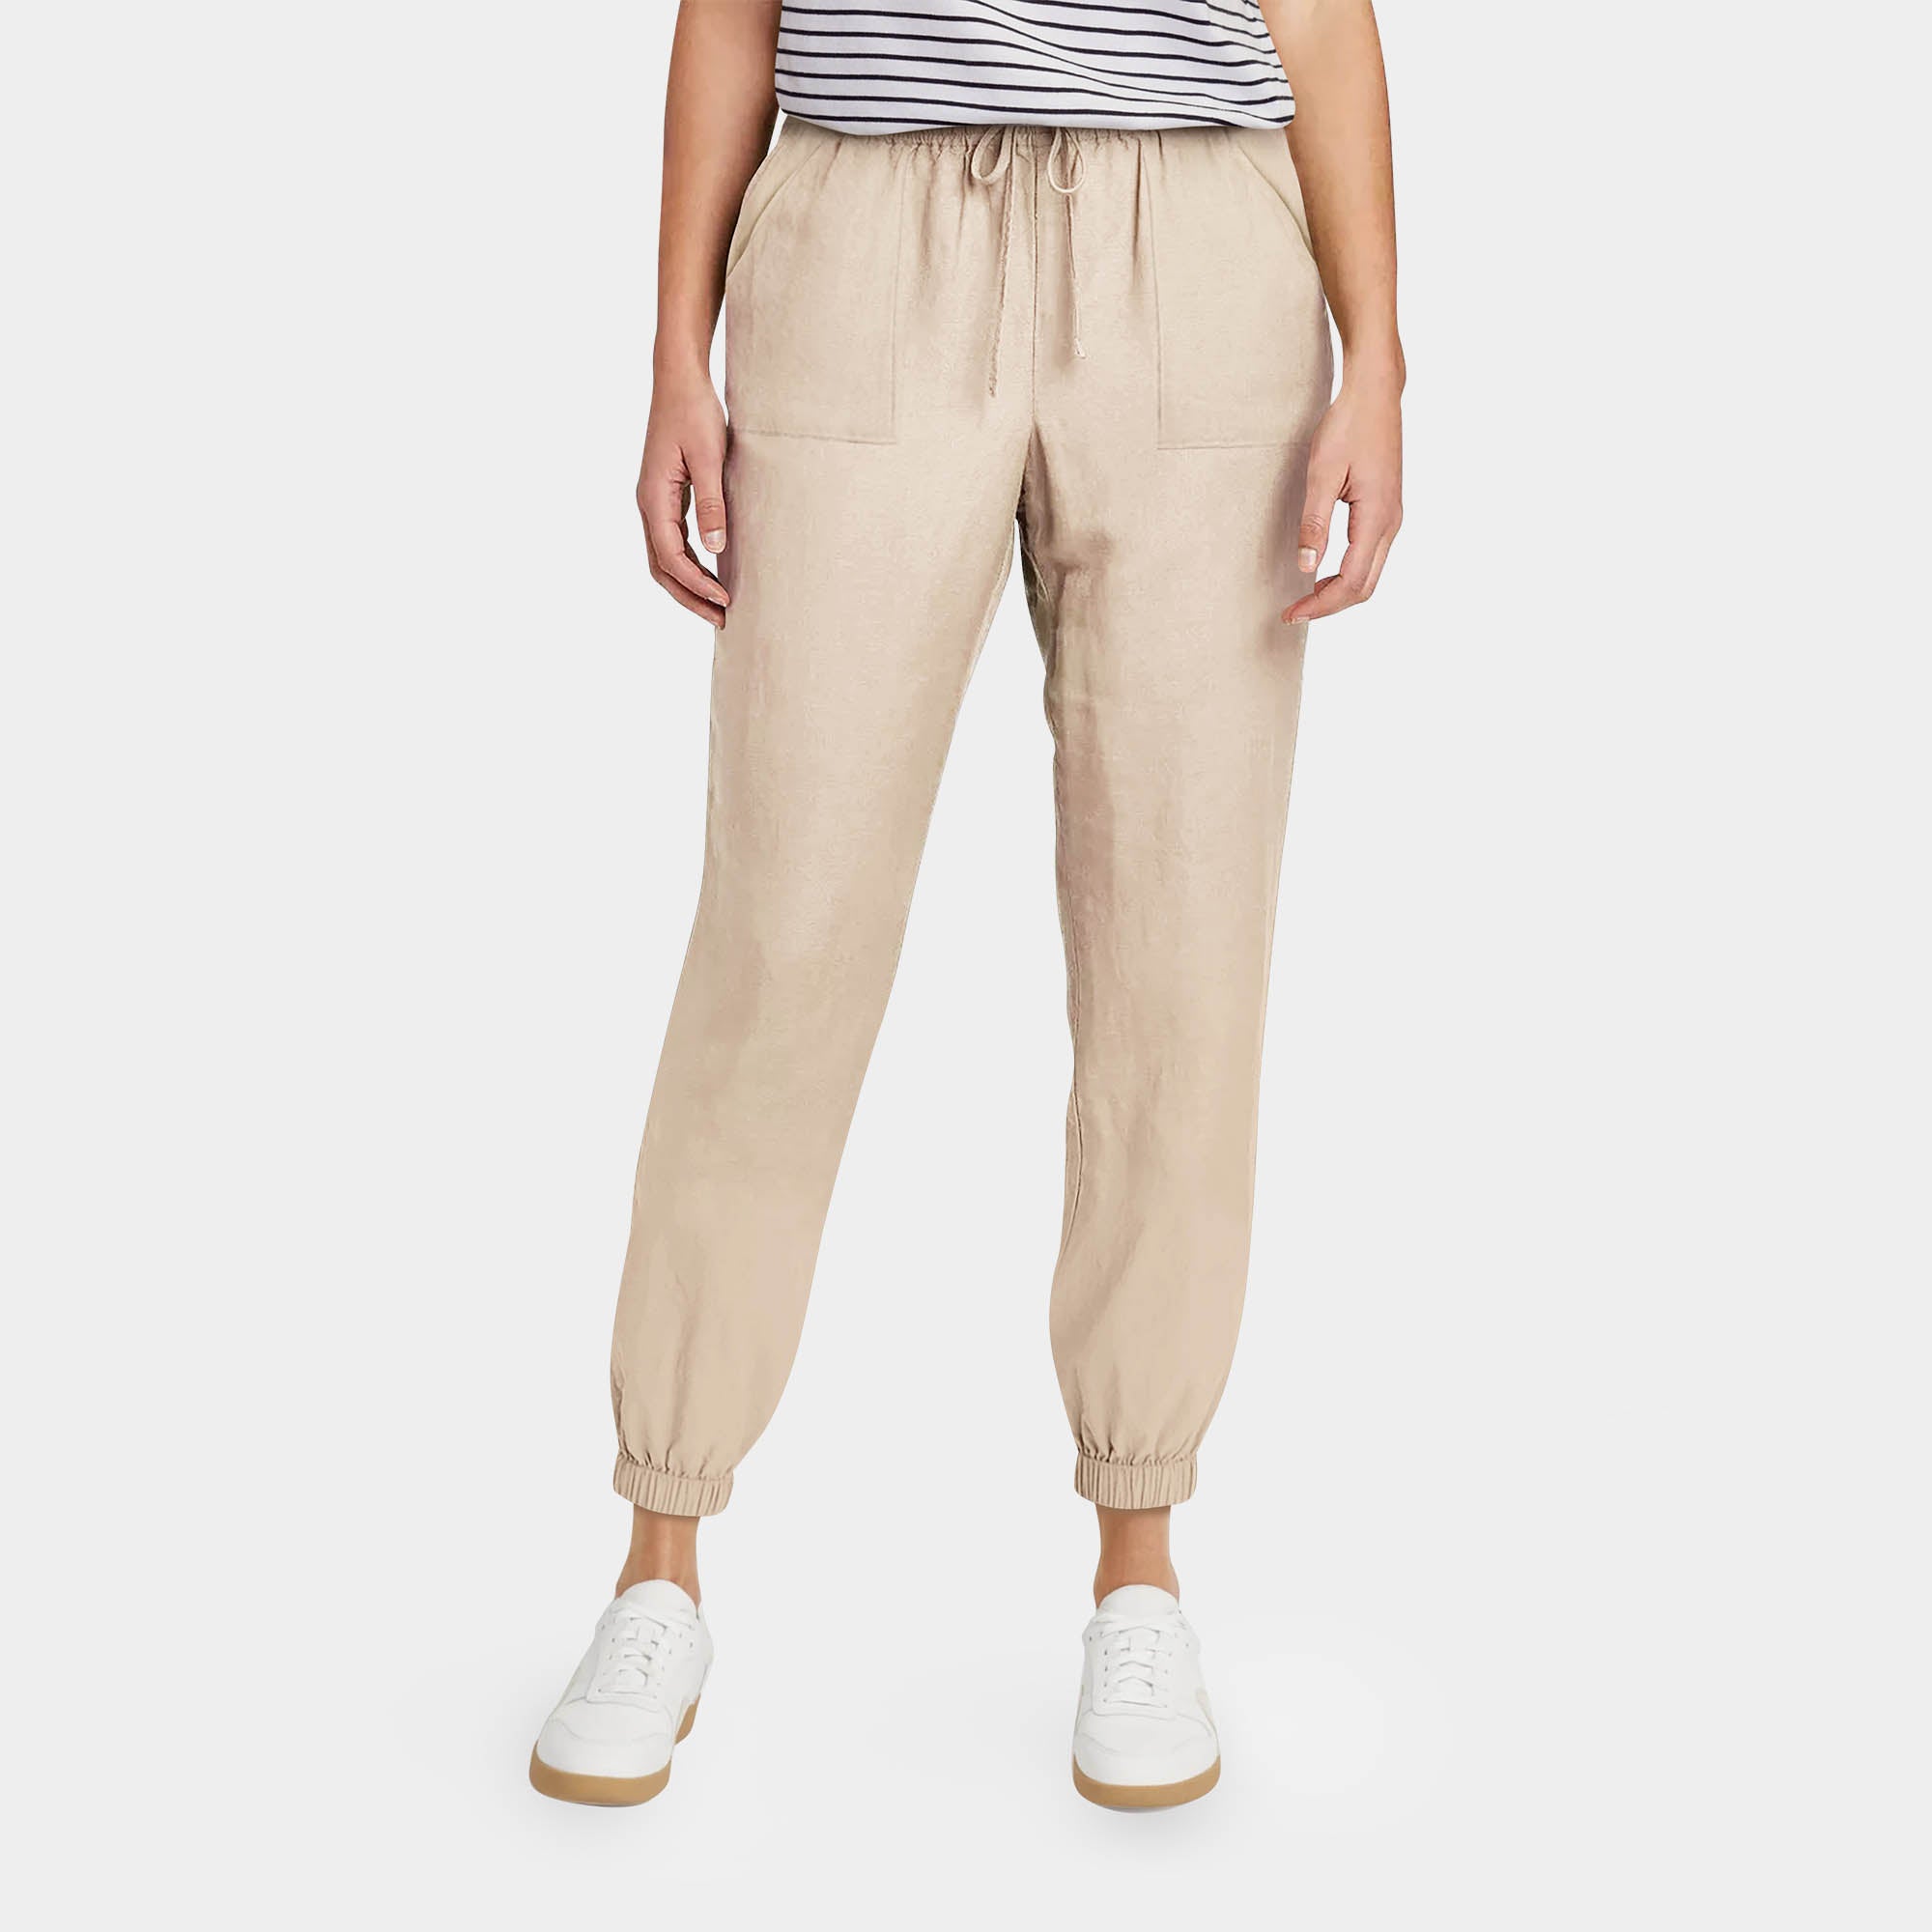 girls_womens_linen pants_trousers_work at home_remote_formal business_casual_missy_old navy_wide leg_plus size_petite_blend pants_cotton_macys_zara_oceanside_beach pants_roxy_romper_drawstring_summer_coverup_resort pants_relax_organic cotton_palazzo_hawaii_cotton_misses_suits_loose_board_clearance_tall_travel_trip_Khaki